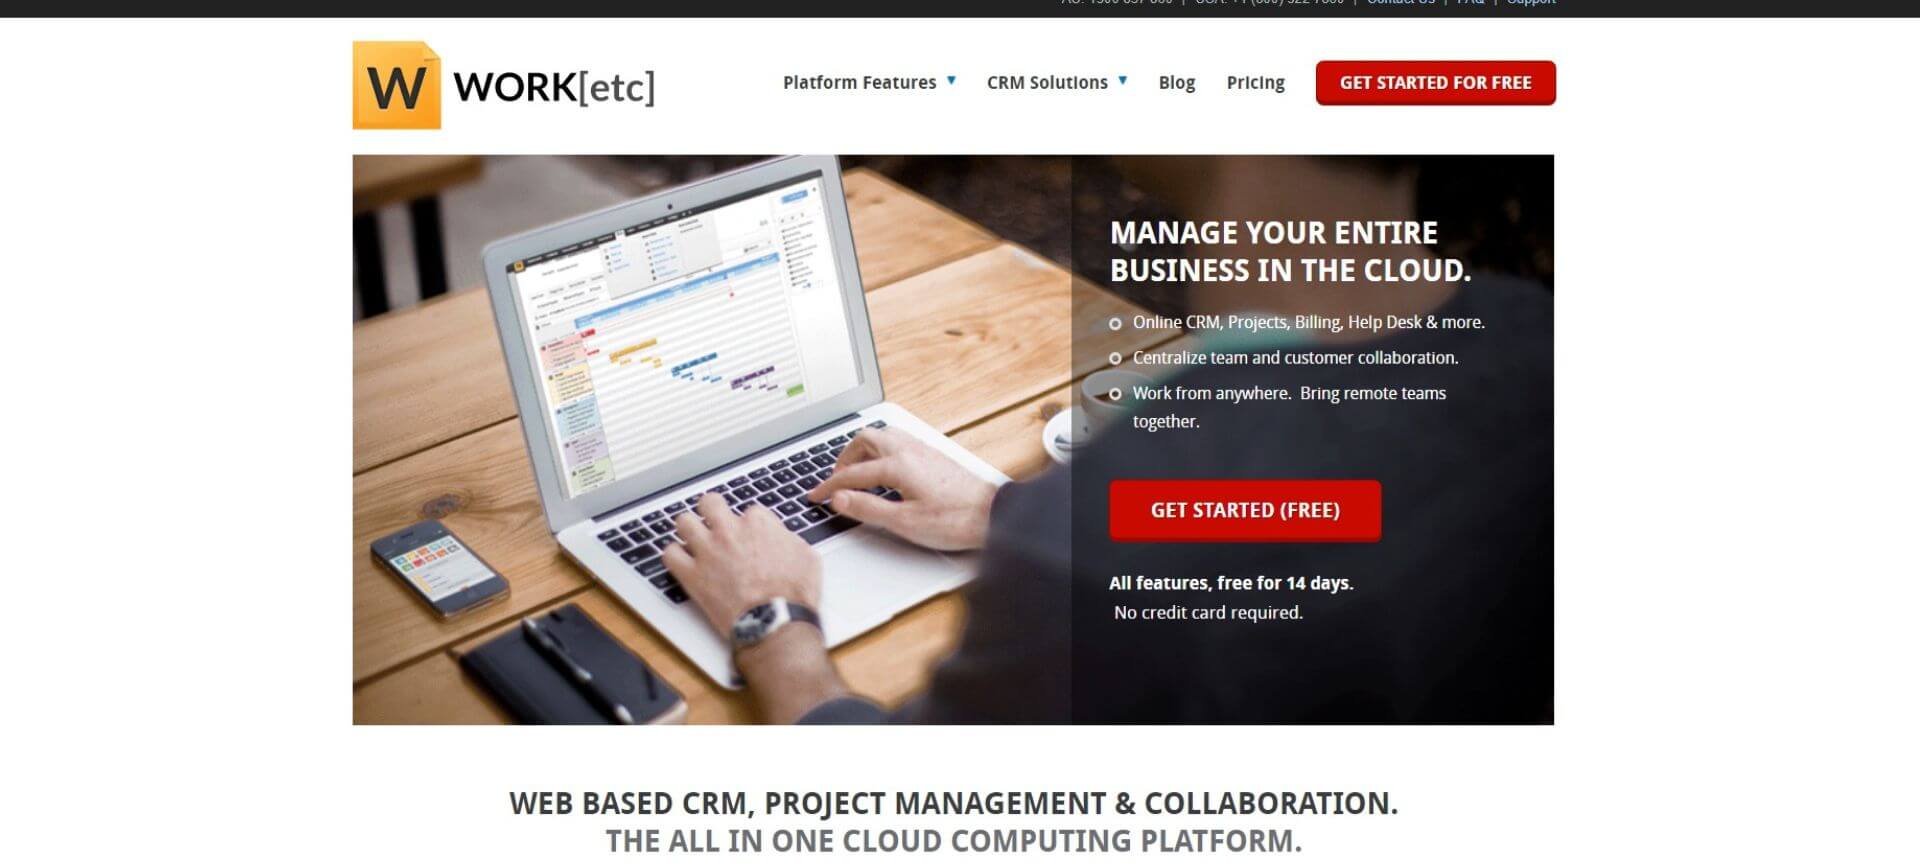 Worketc a CRM software - TECHNOLOGY TOOLS EVERY NONPROFIT NEEDS